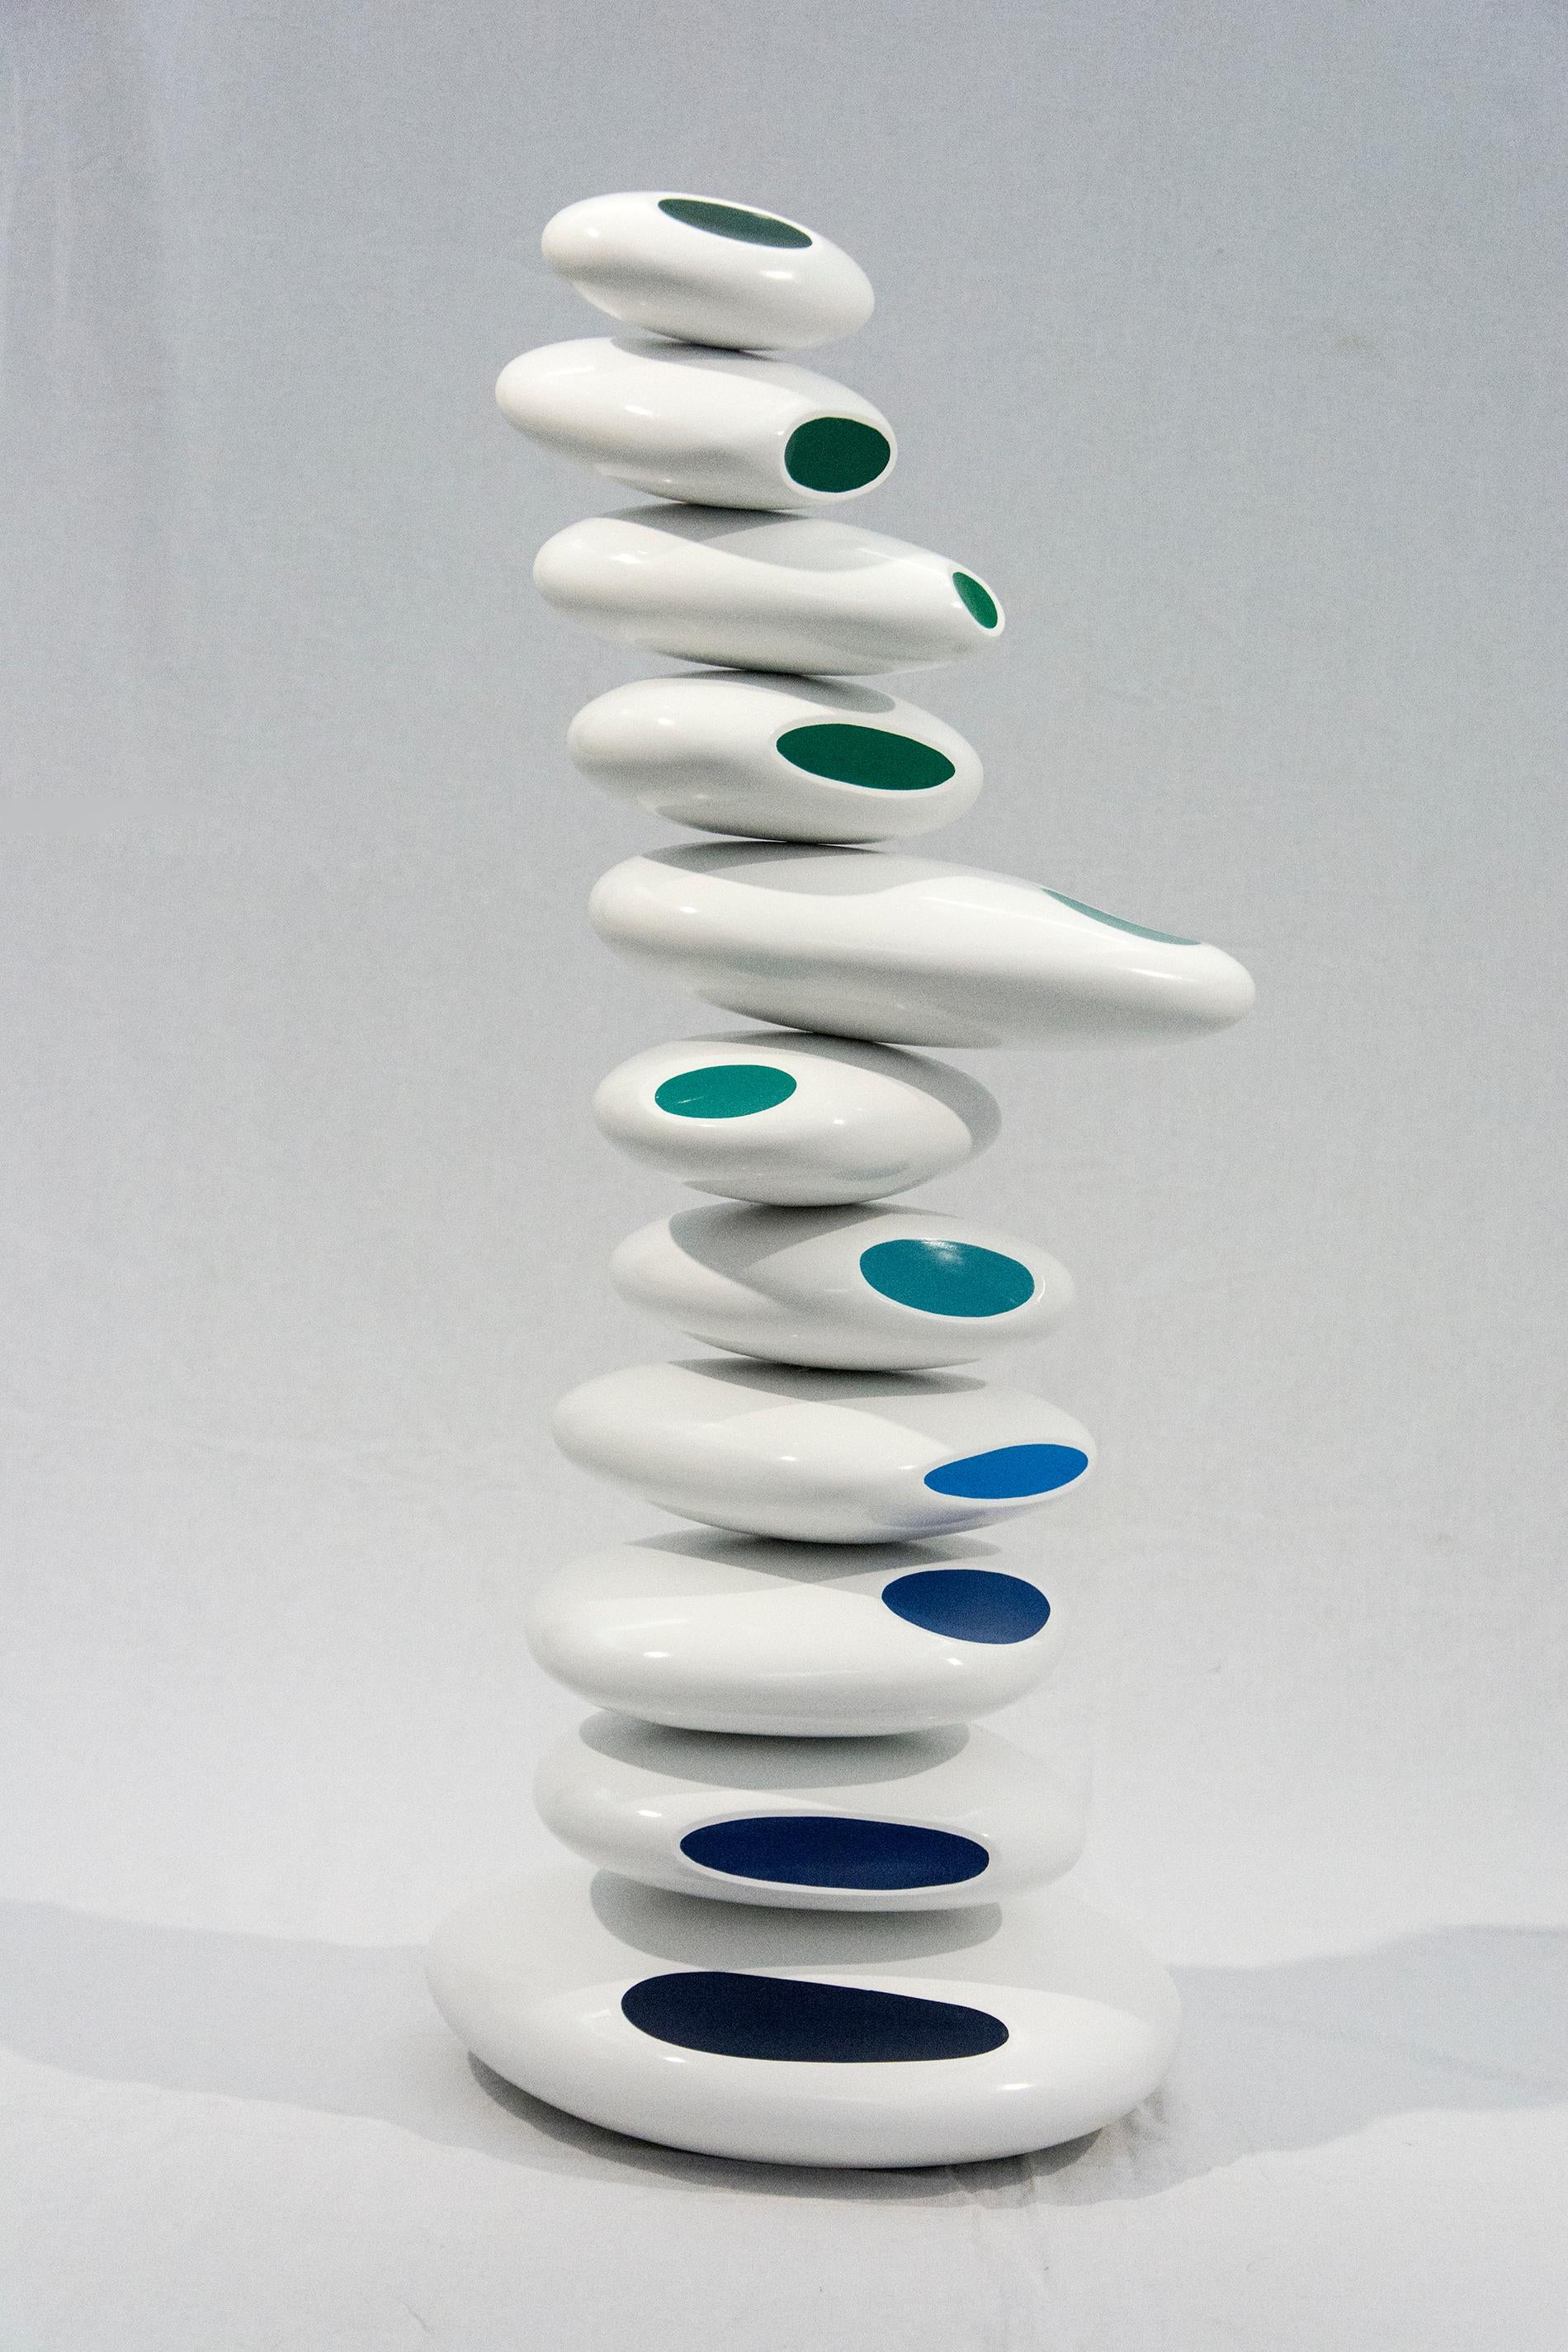 Ocean - small stacked sculpture of white ovals, with blue and green highlights